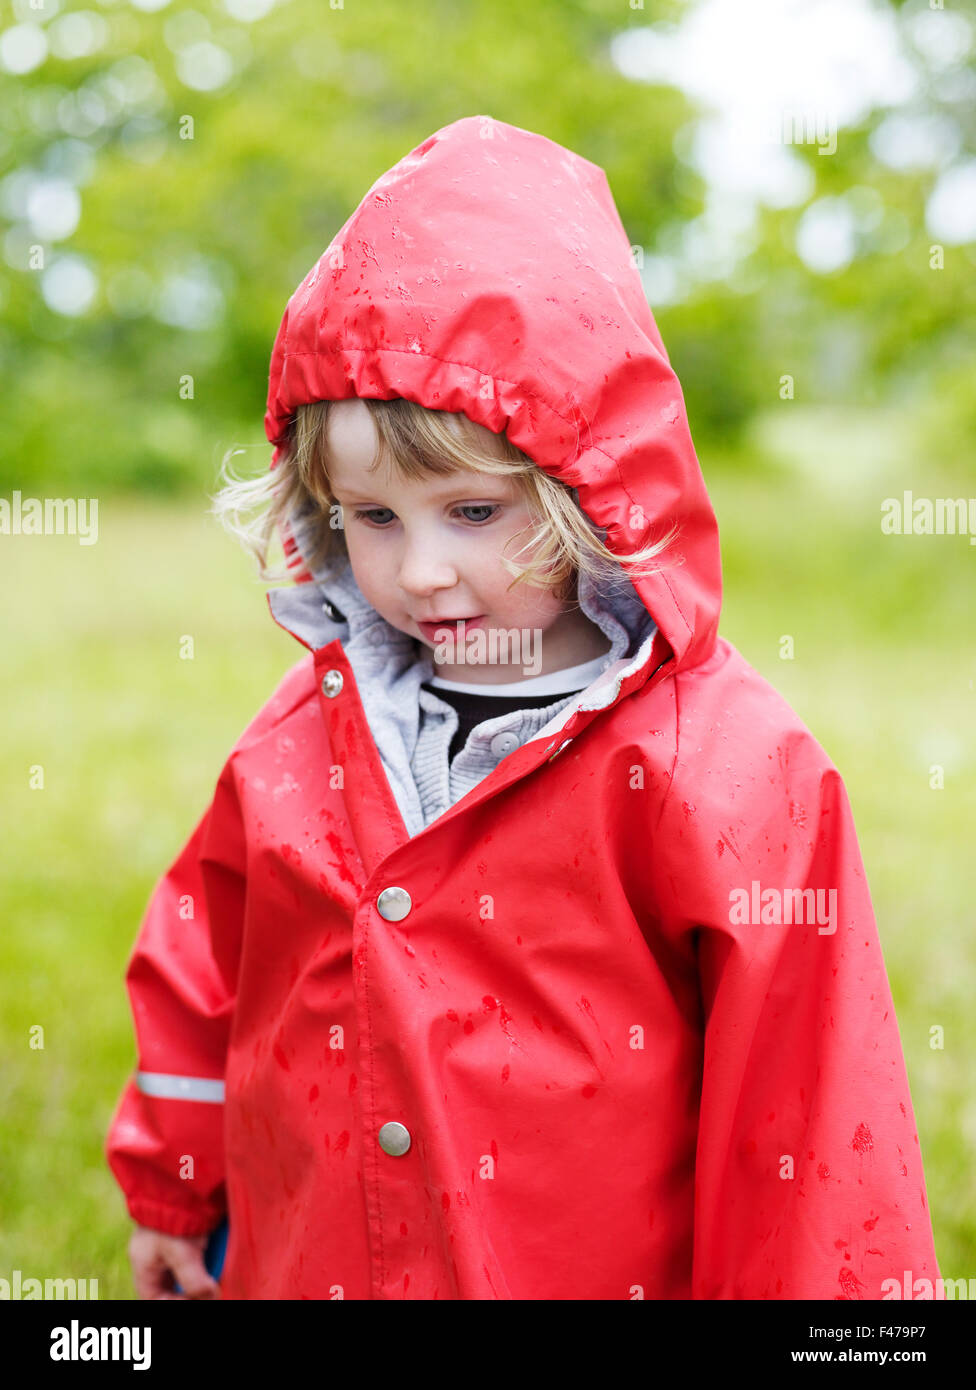 A girl in a red raincoat, Sweden Stock Photo - Alamy